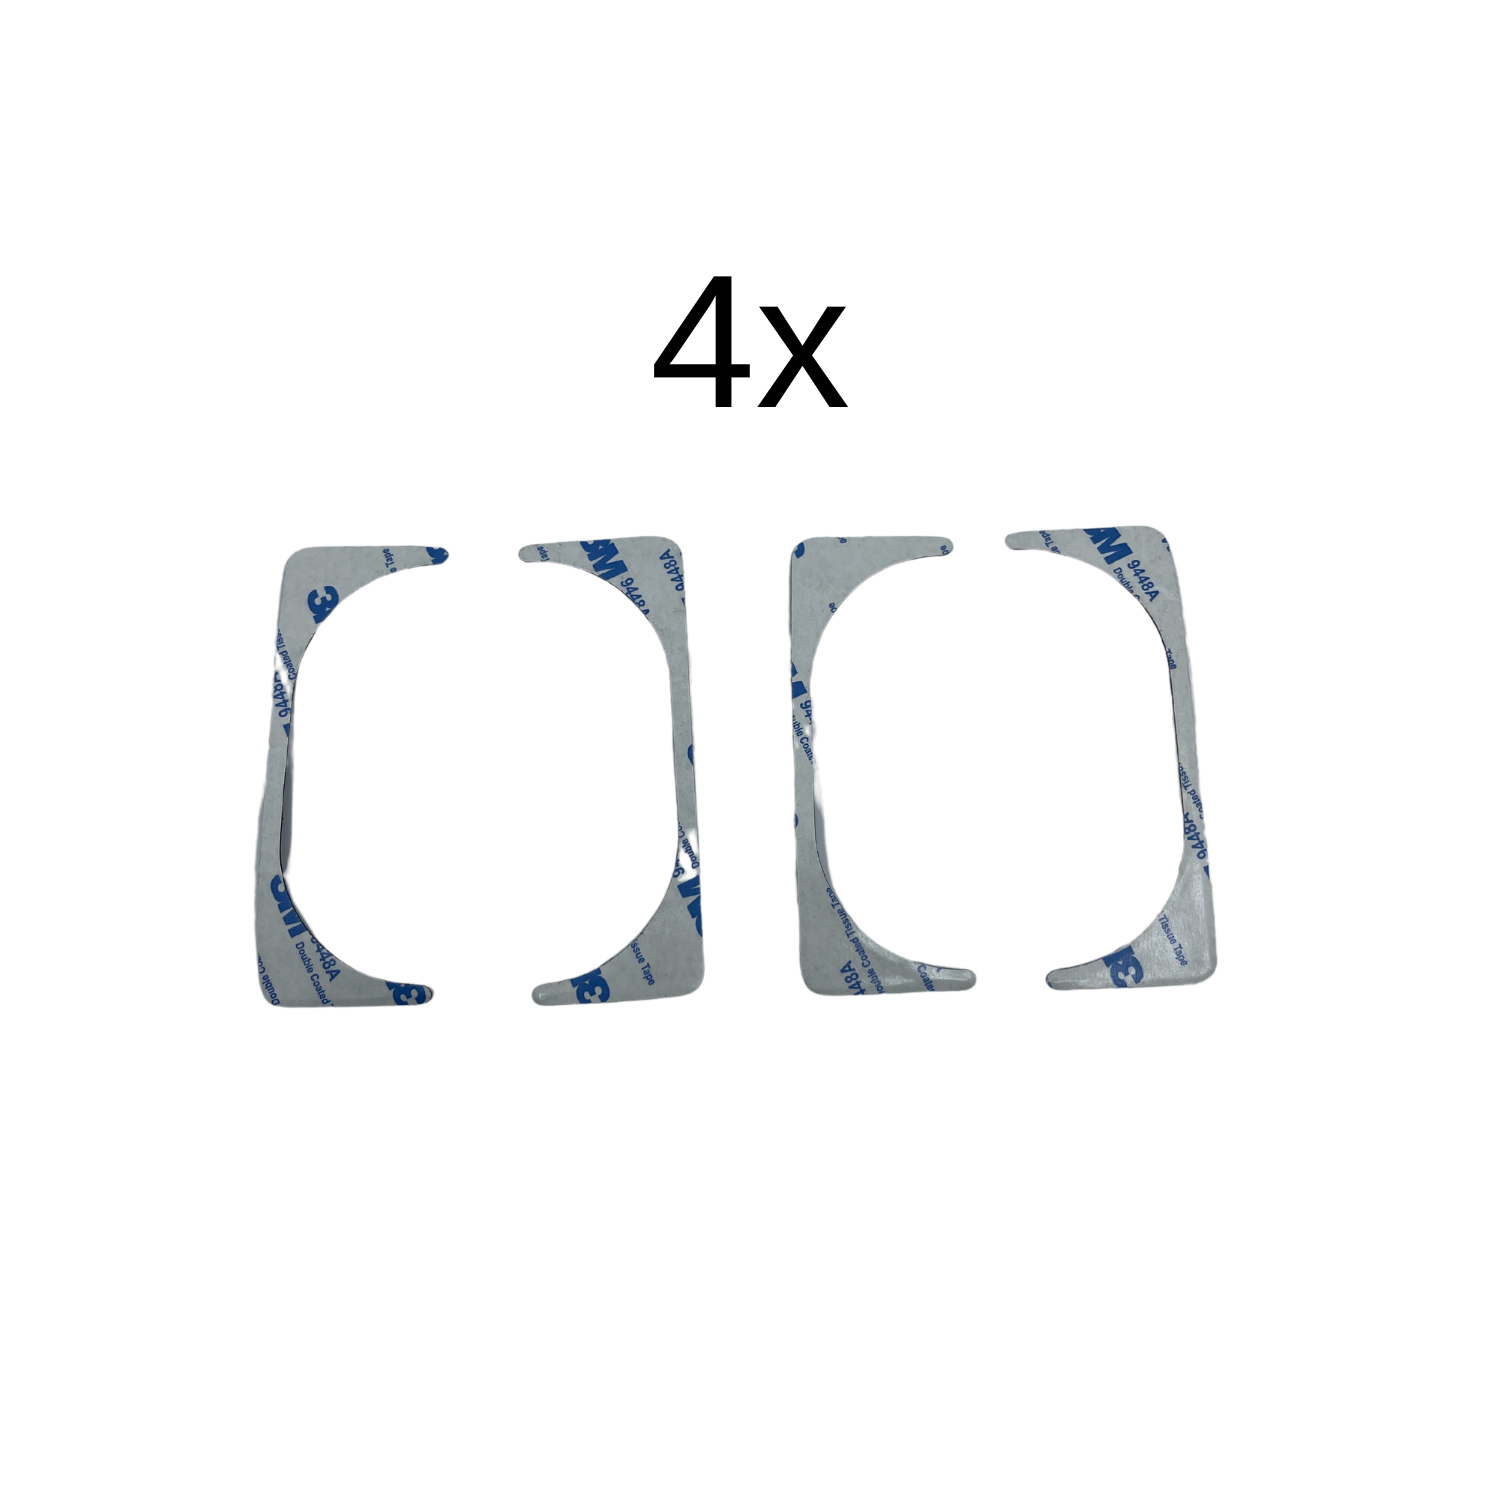 ARMOUR Replacement Foam Gasket for ARMOUR Filter Holder